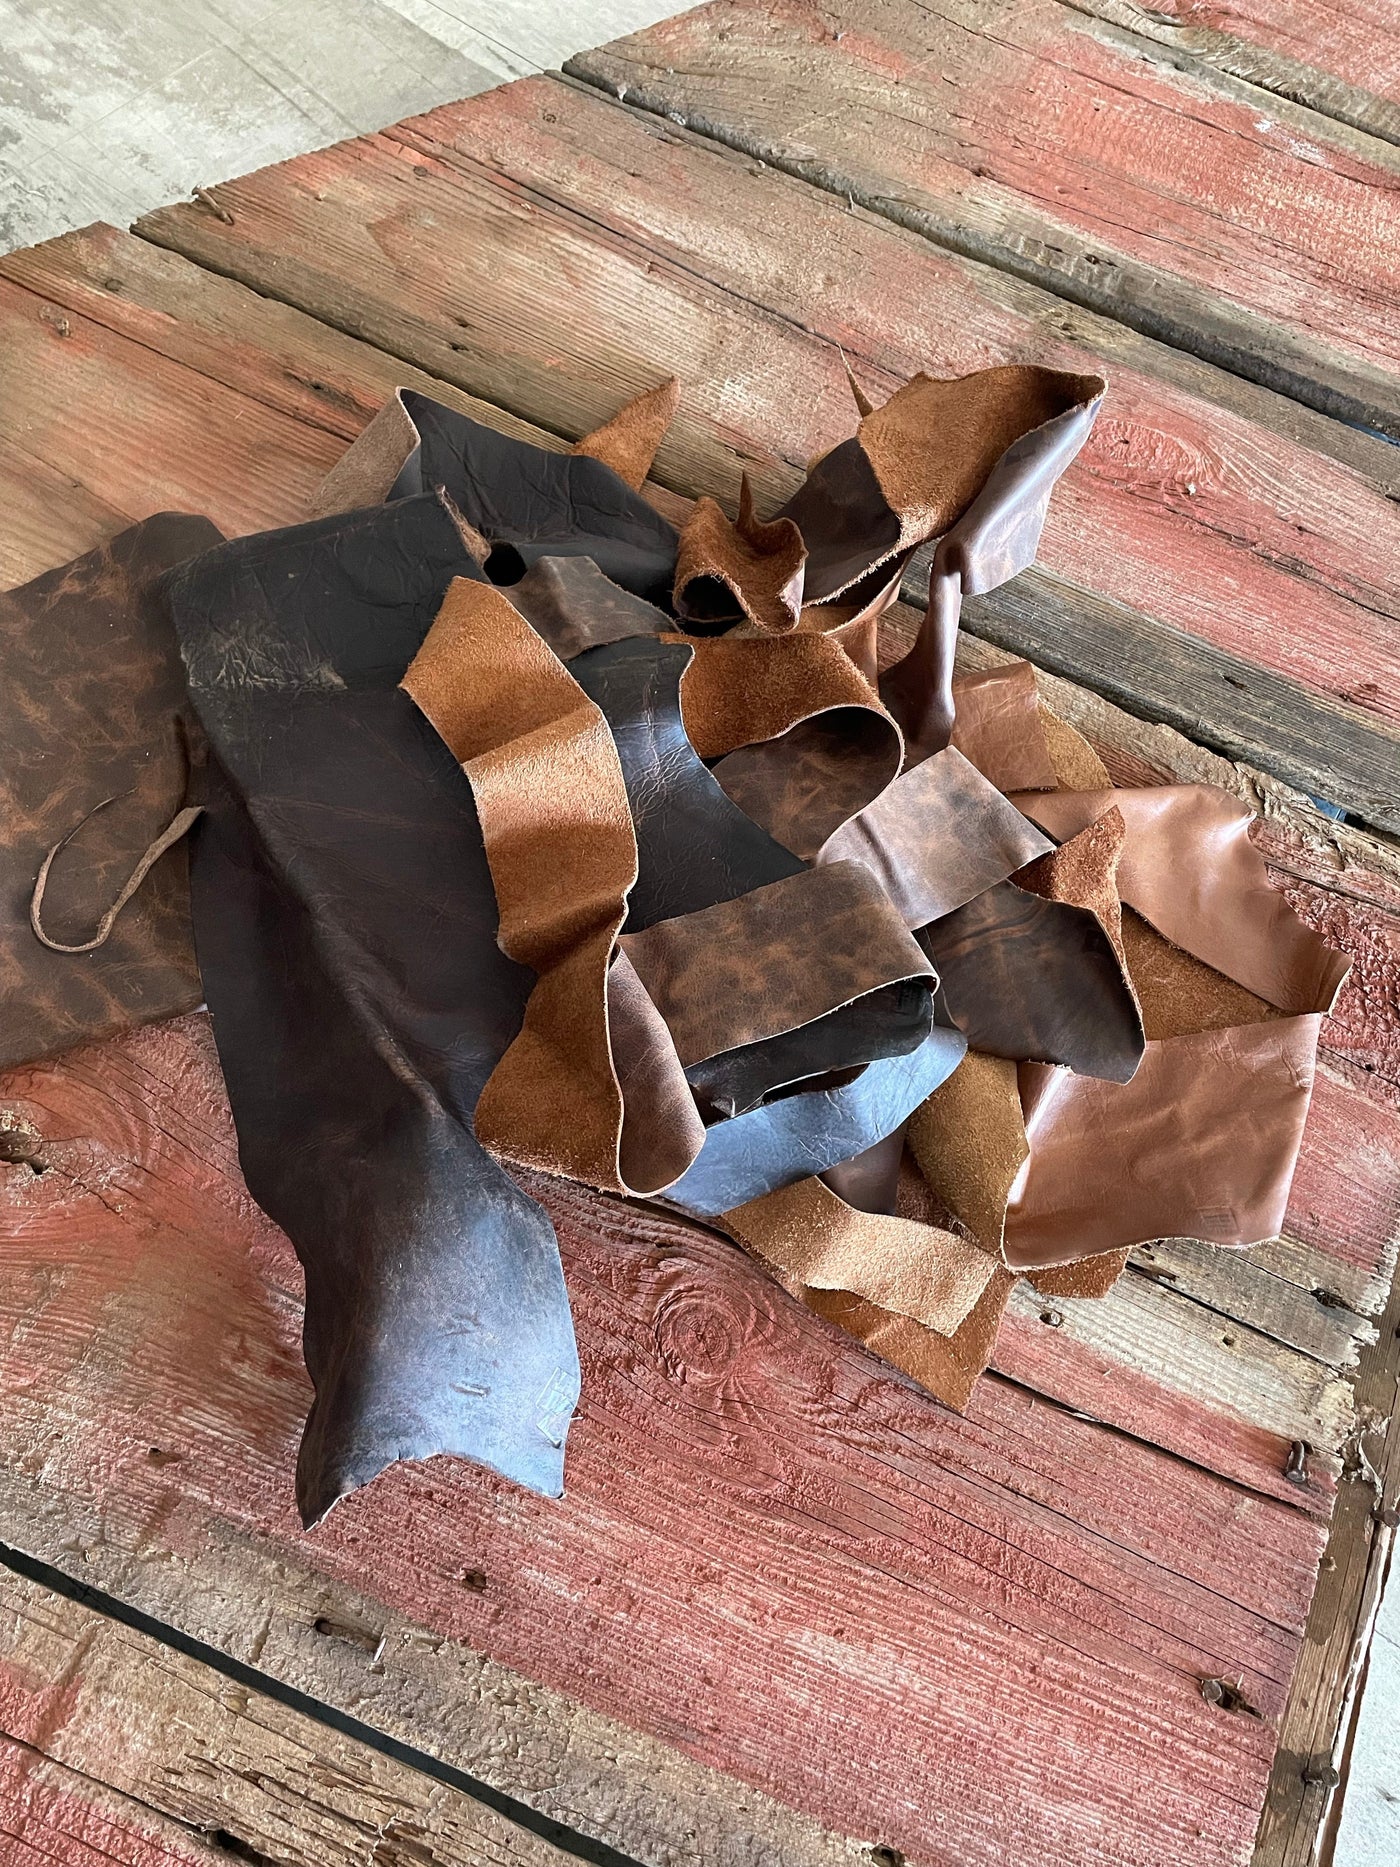 Leather Scraps - 1 lb. Box-Western-Cowhide-Bags-Handmade-Products-Gifts-Dancing Cactus Designs